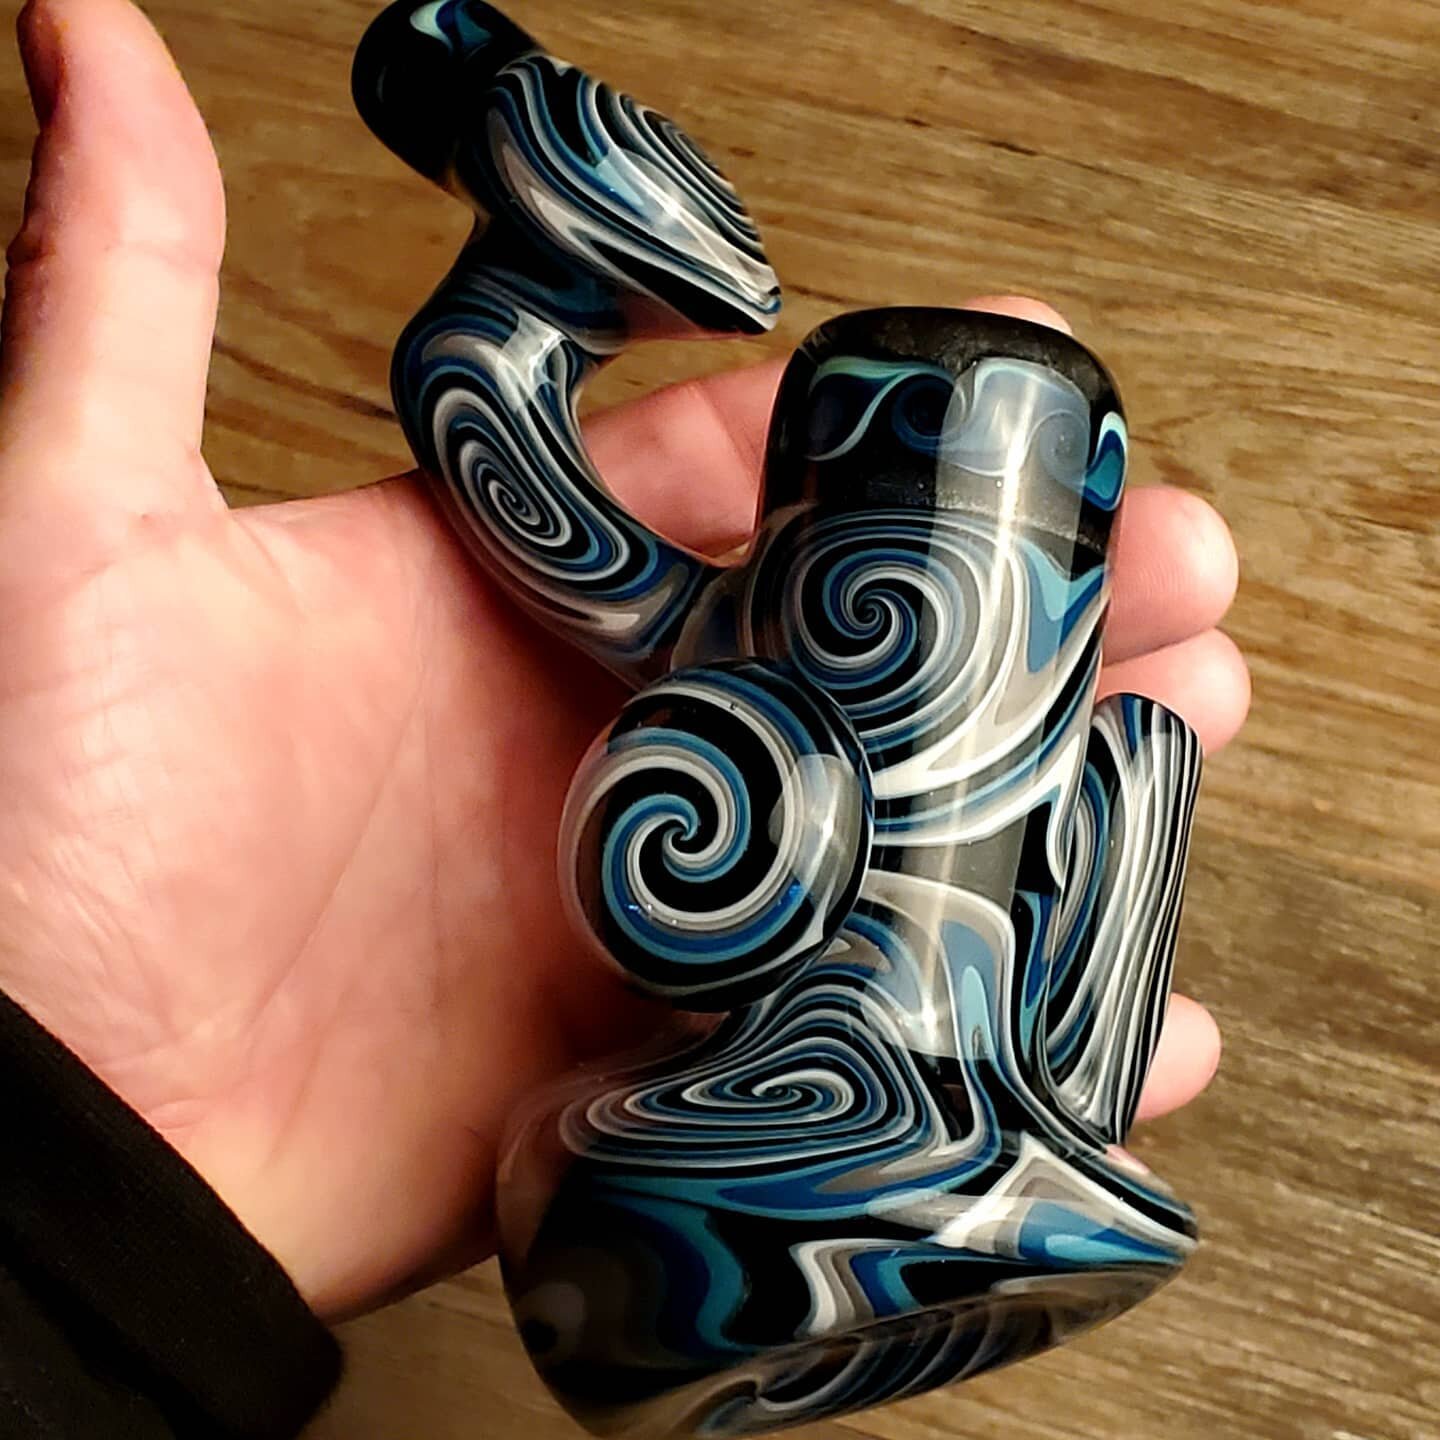 Loads of fun with this snorkel carb squatlock with scarob mouthpiece! 
What makes your soulshine?
#soulshineartsstudio #humboldtglassschool #Humboldt #glassblowing #glassprayer #glasschurch #willosglass #ogglass #glasspipes #livethelifeyoulove #letyo